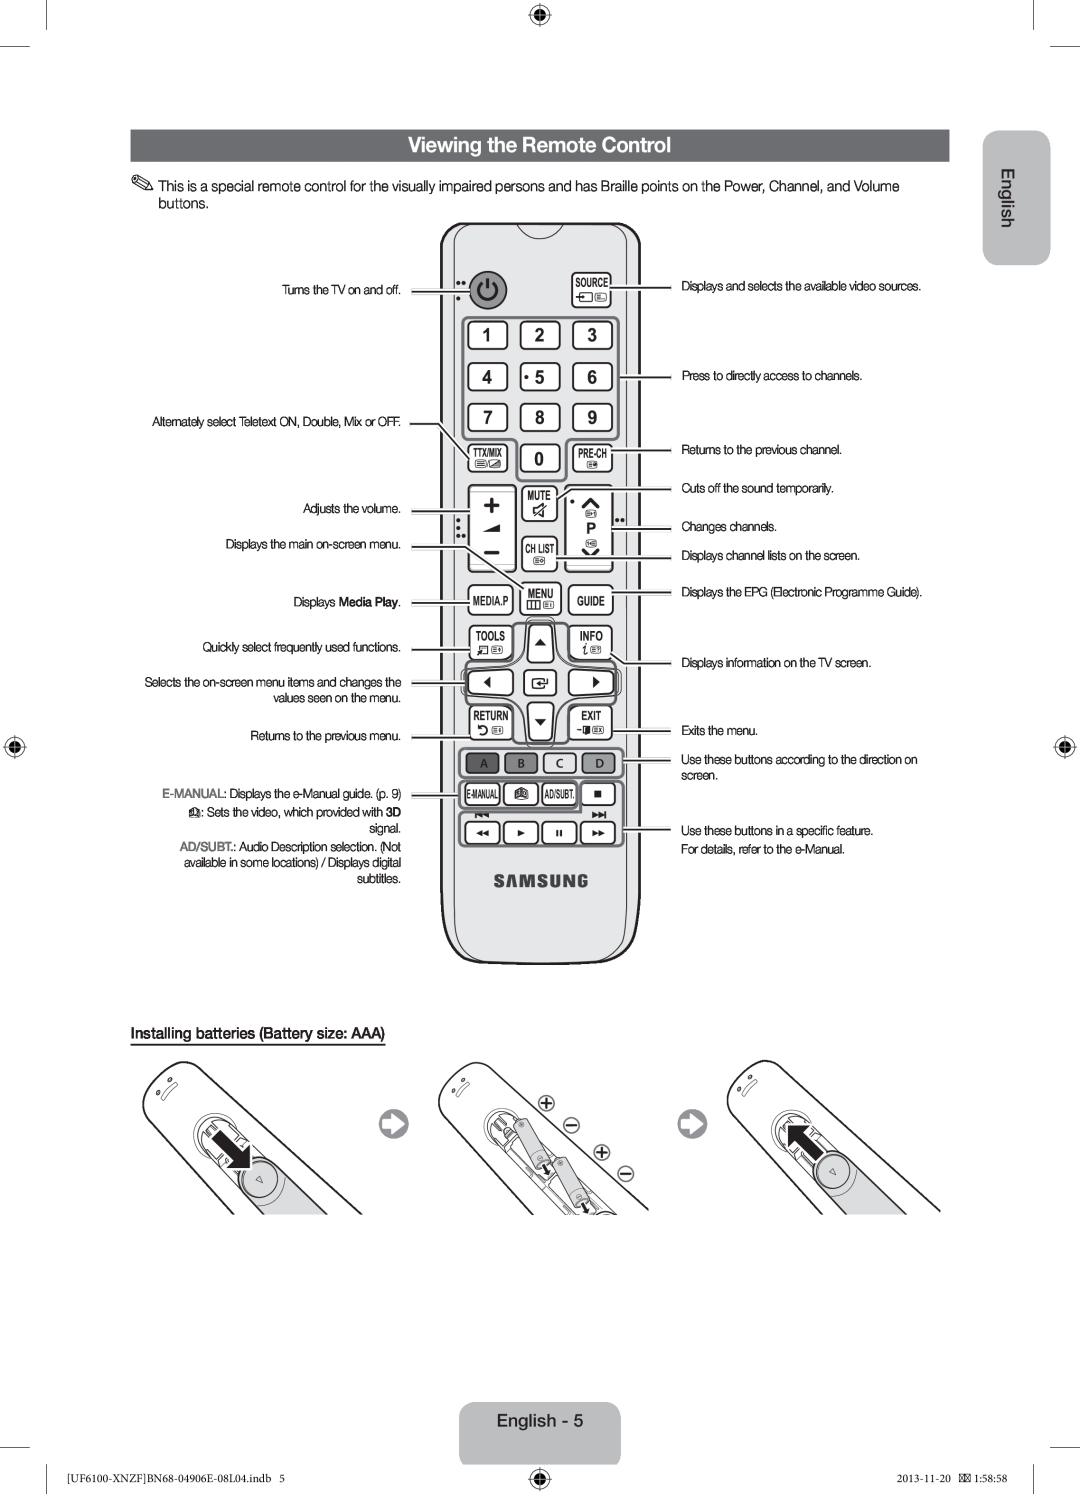 Samsung UE46F6100AWXZG, UE32F6100AWXXH manual Viewing the Remote Control, Installing batteries Battery size AAA, English 